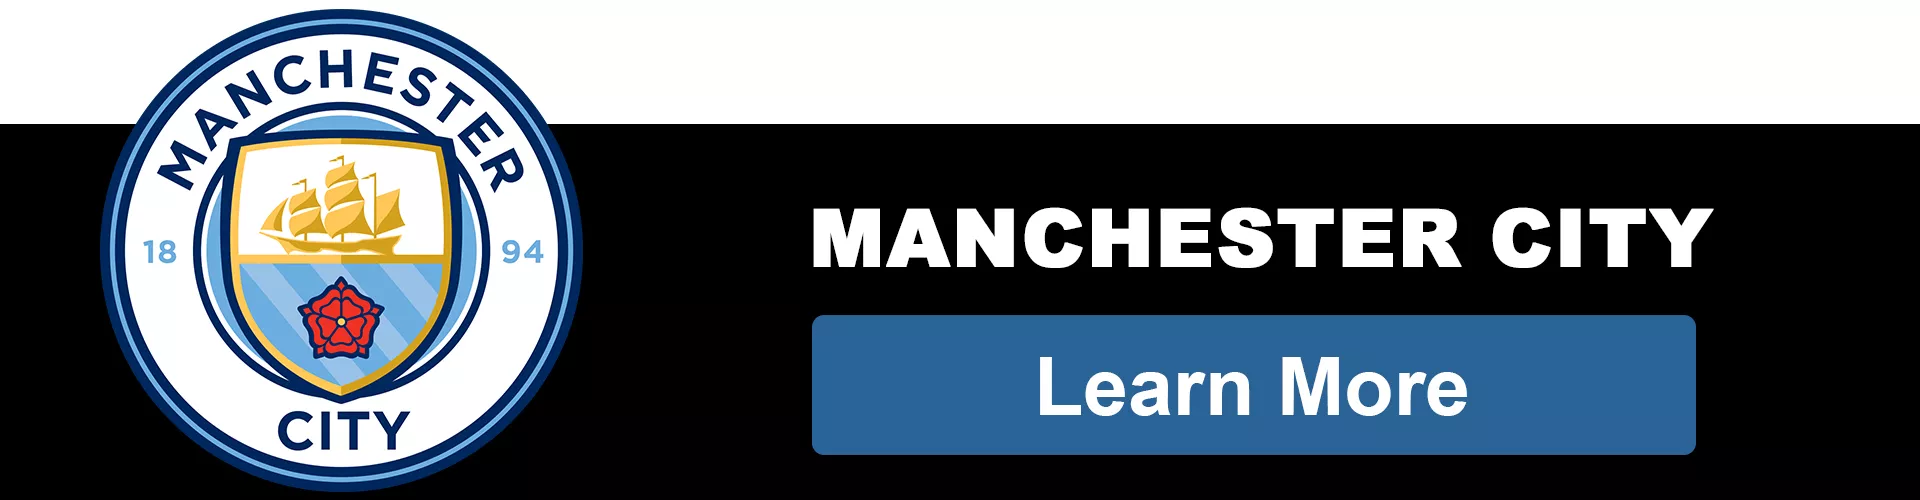 MANCHESTER CITY F.C. - bestsoccerstore